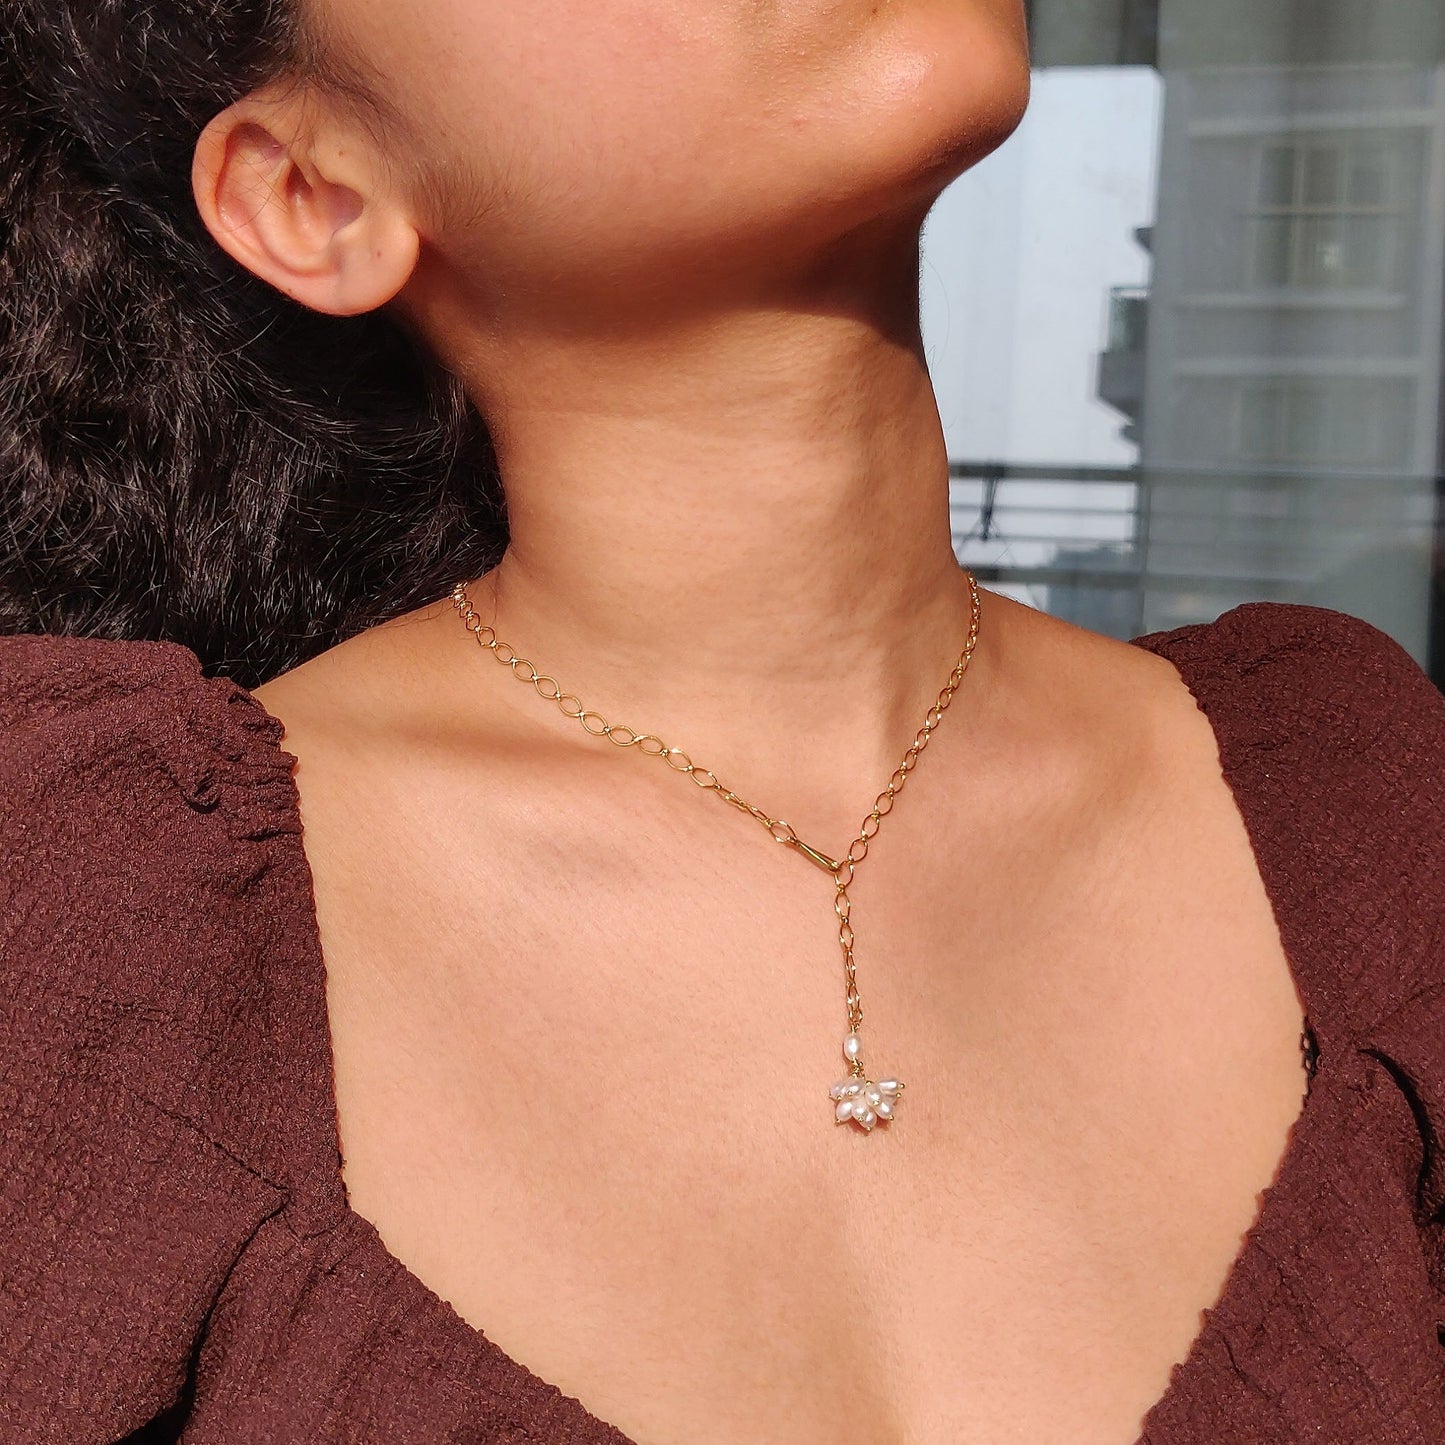 Glided Blume Necklace